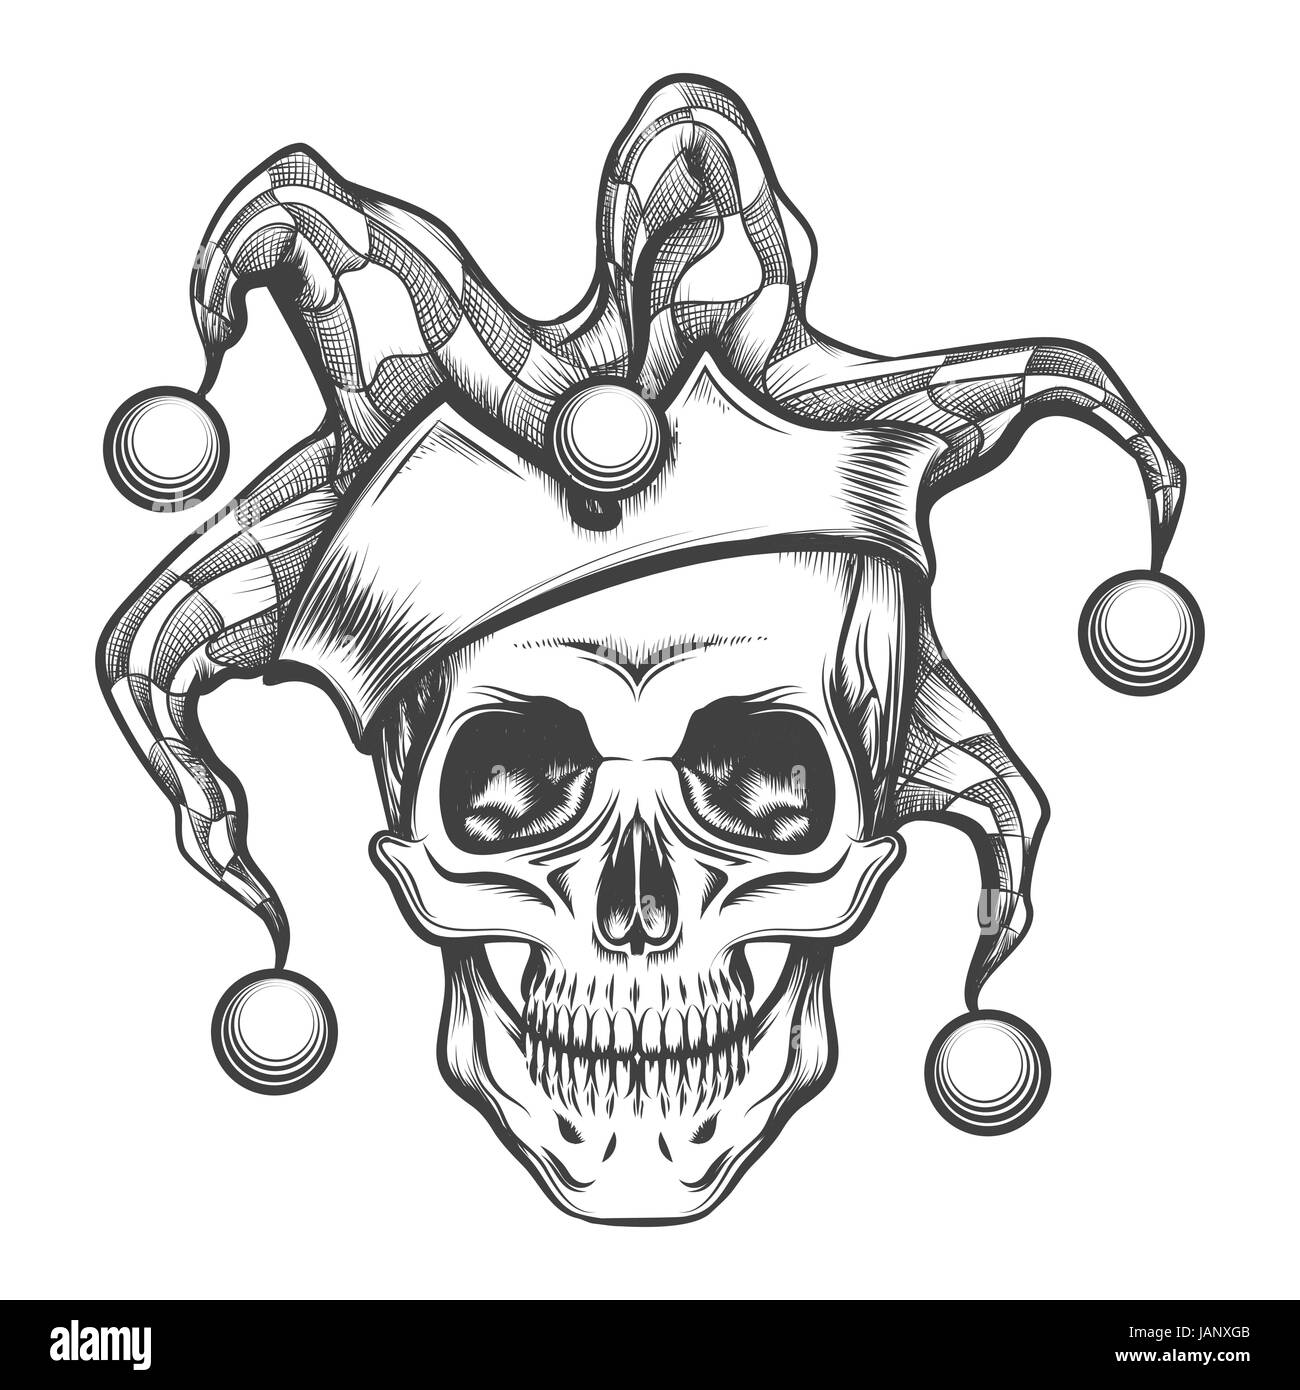 Hand drawn jester skull in fools cap. Vector illustration in engraving tattoo style. Stock Vector